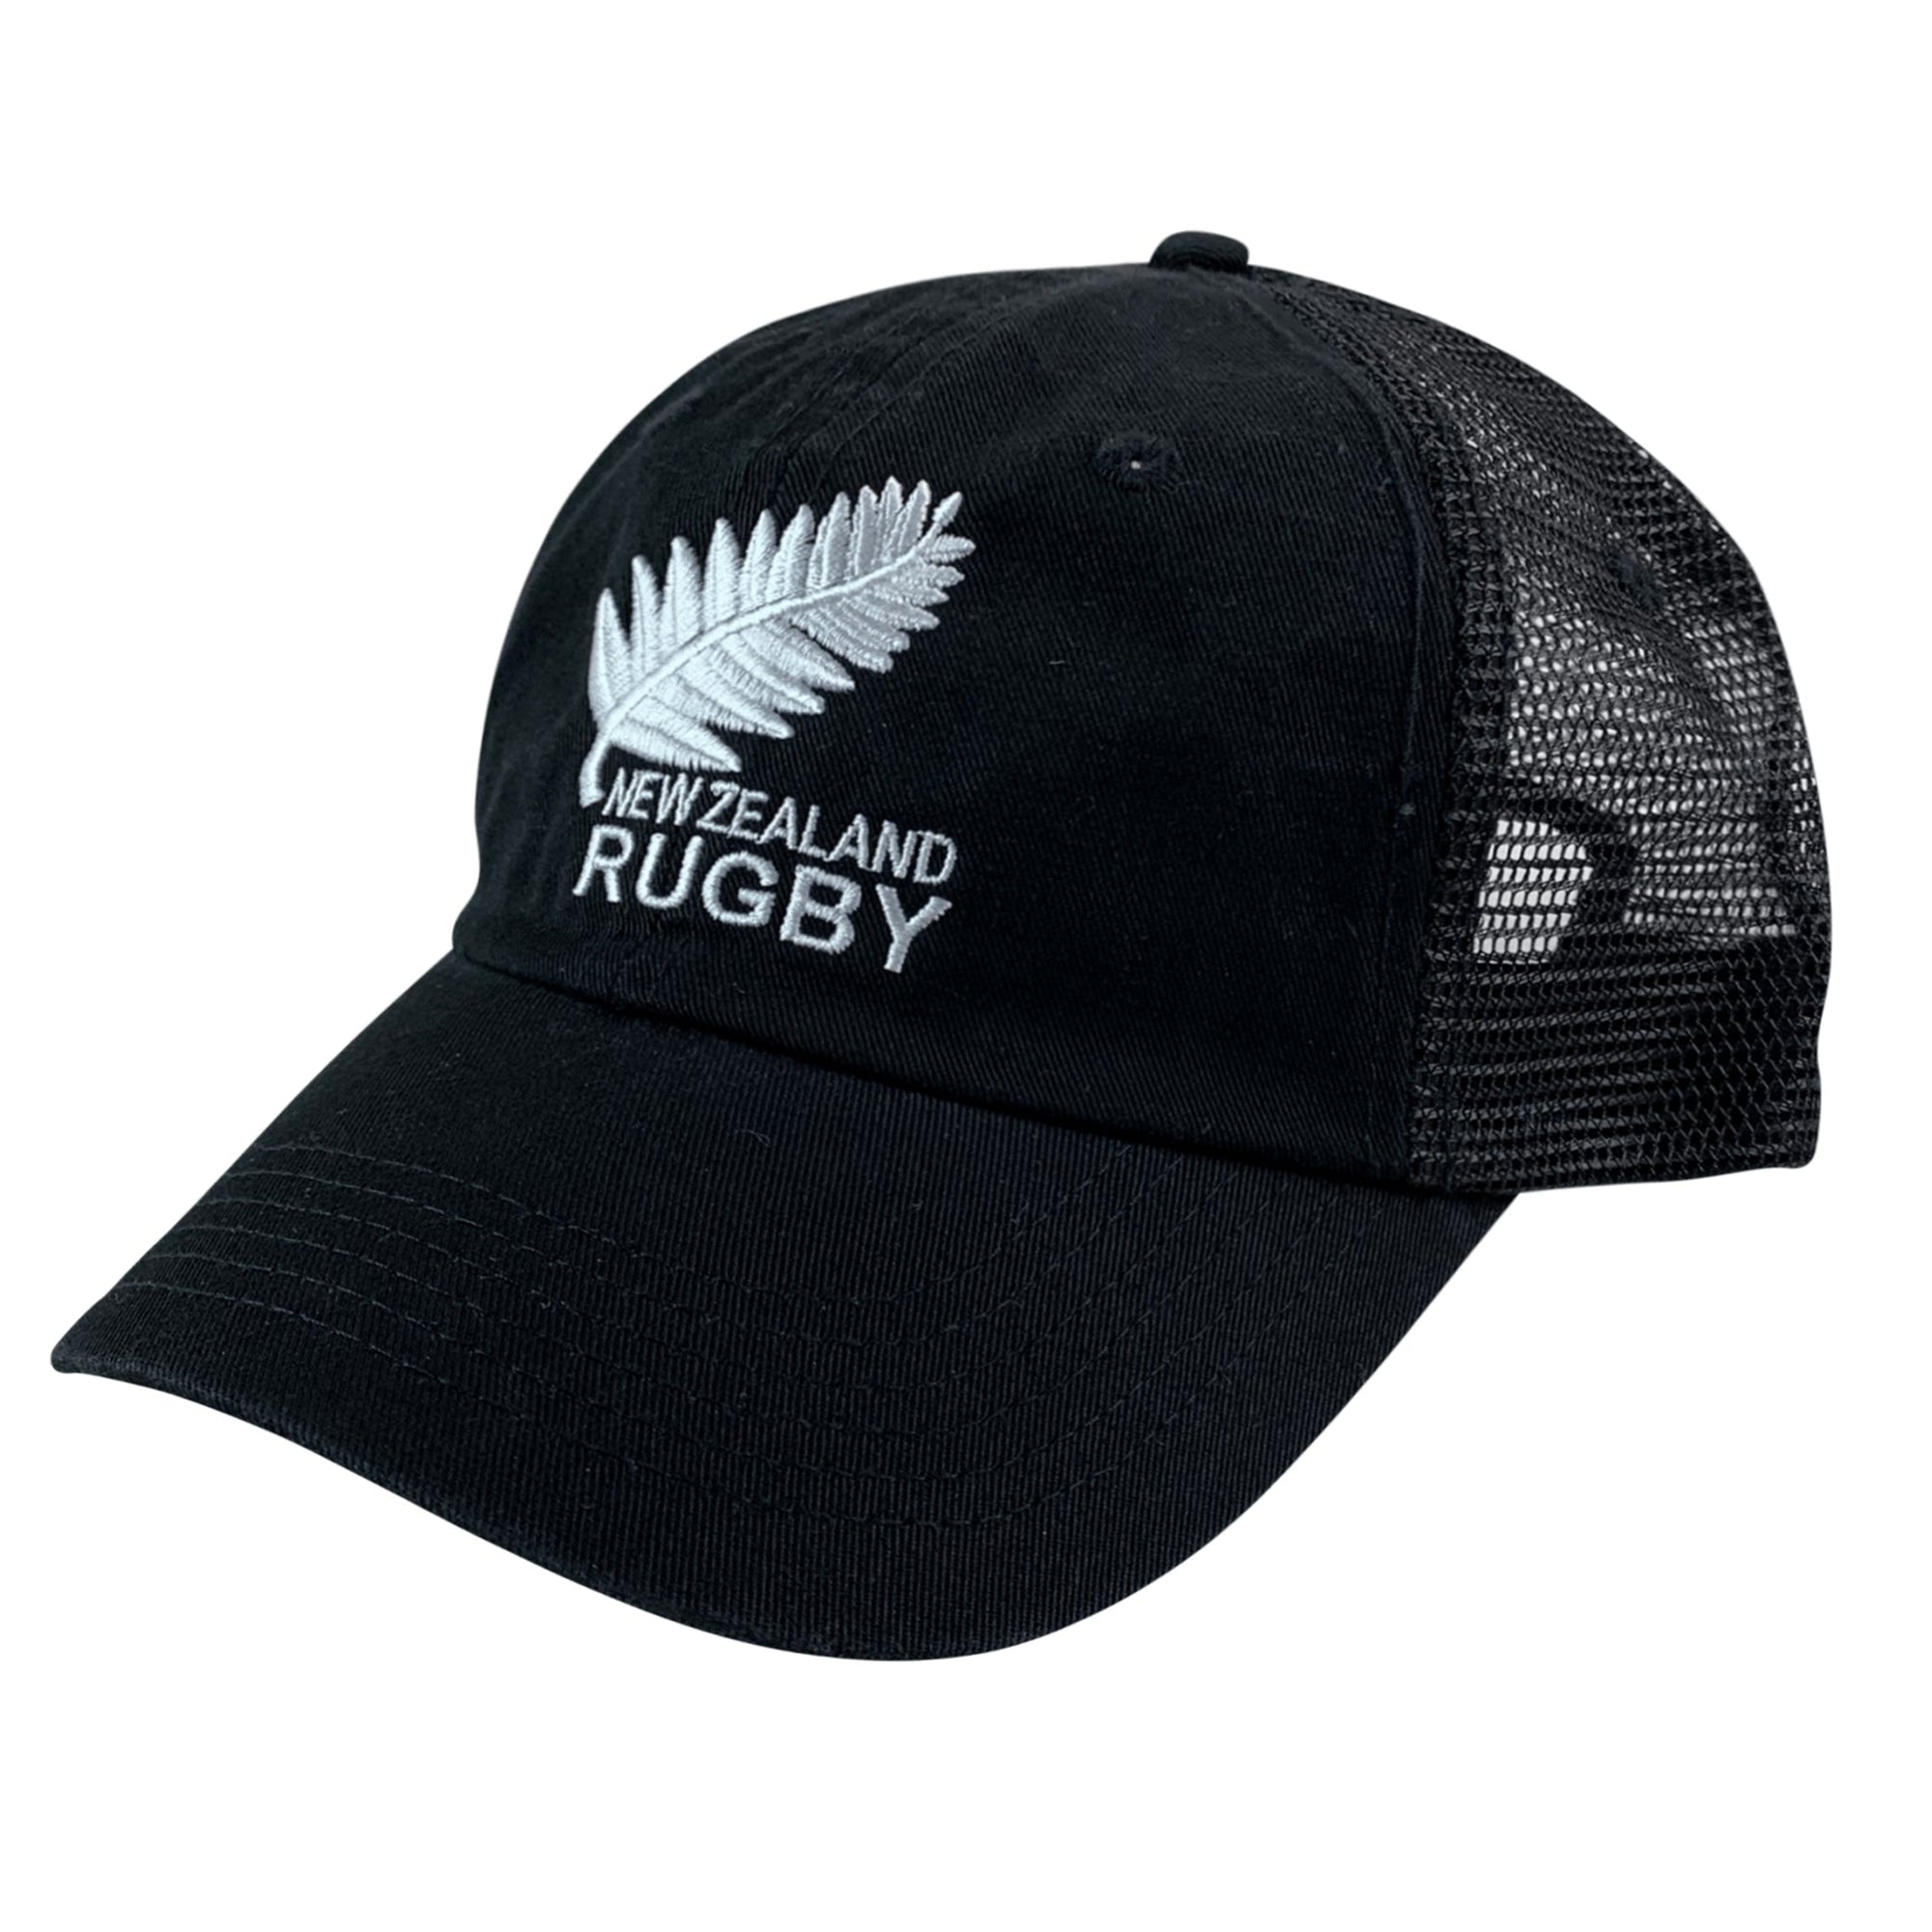 Rugby Imports New Zealand Rugby Trucker Cap